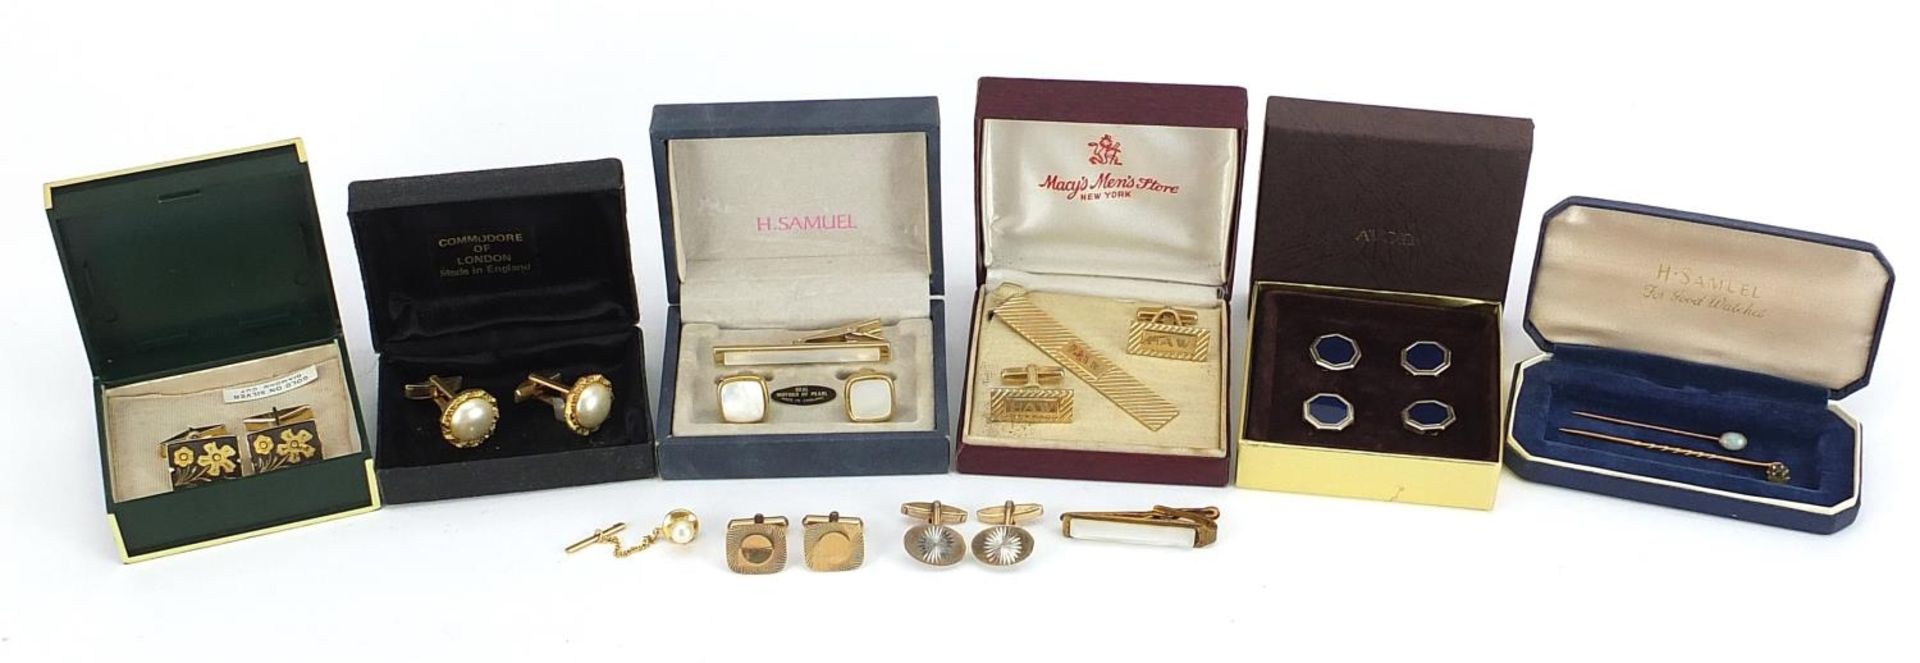 Collection of vintage and later cufflinks and studs